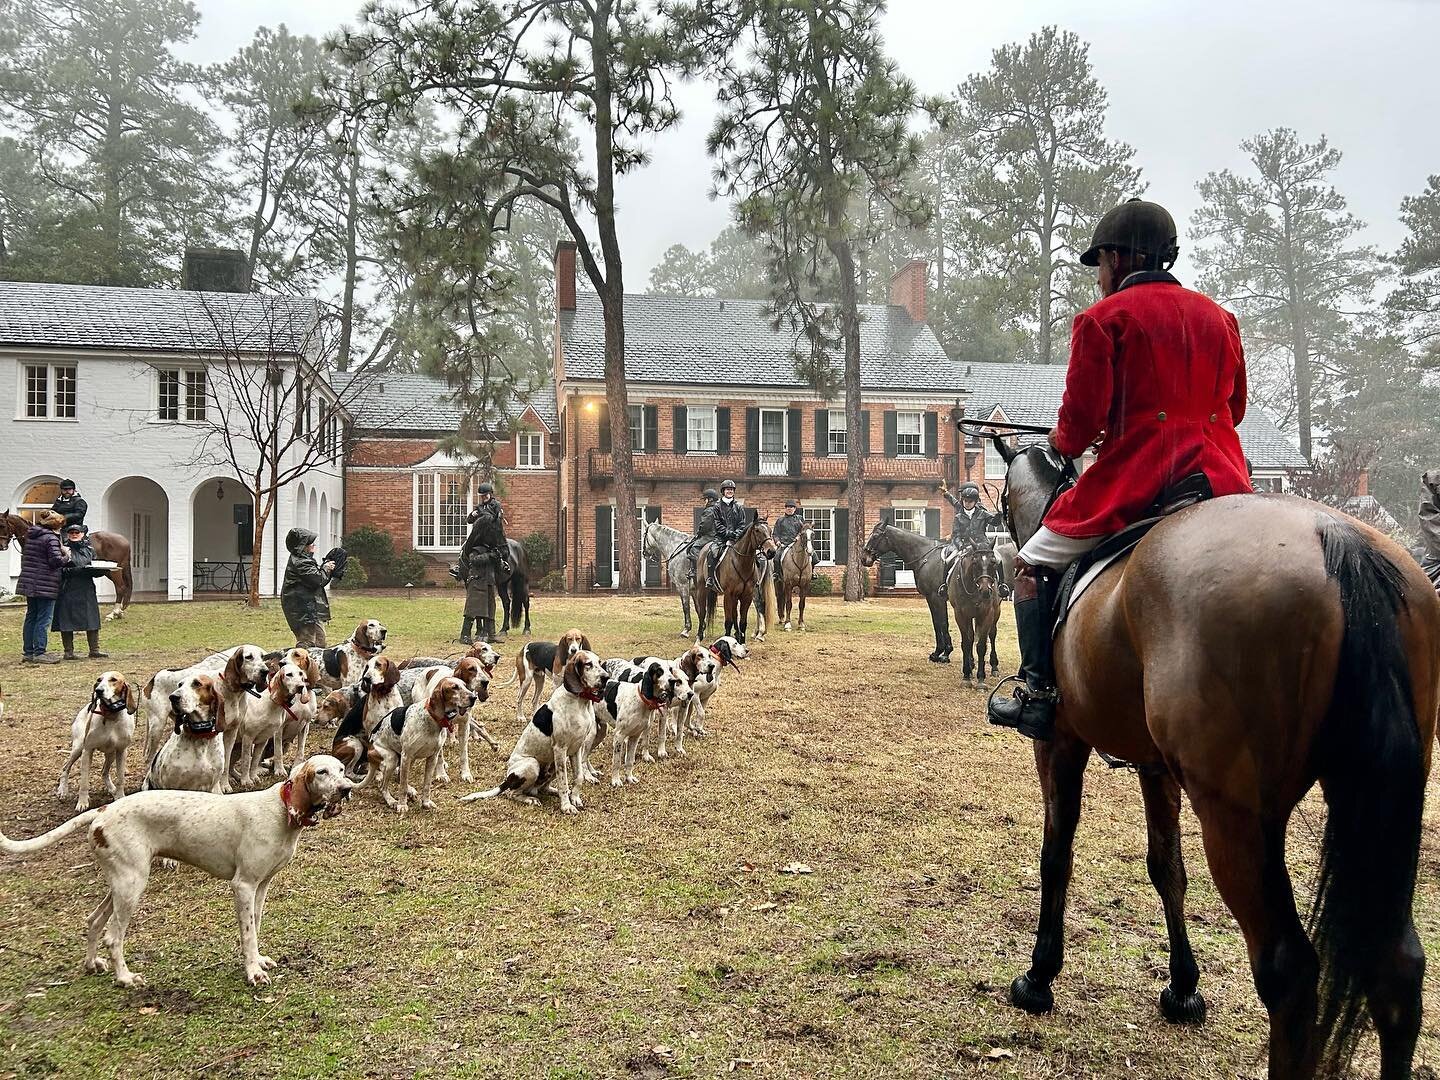 Wake up, watch a fox hunt real quick, go back home for breakfast. Normal Saturday. 

#northcarolinalife 🏇